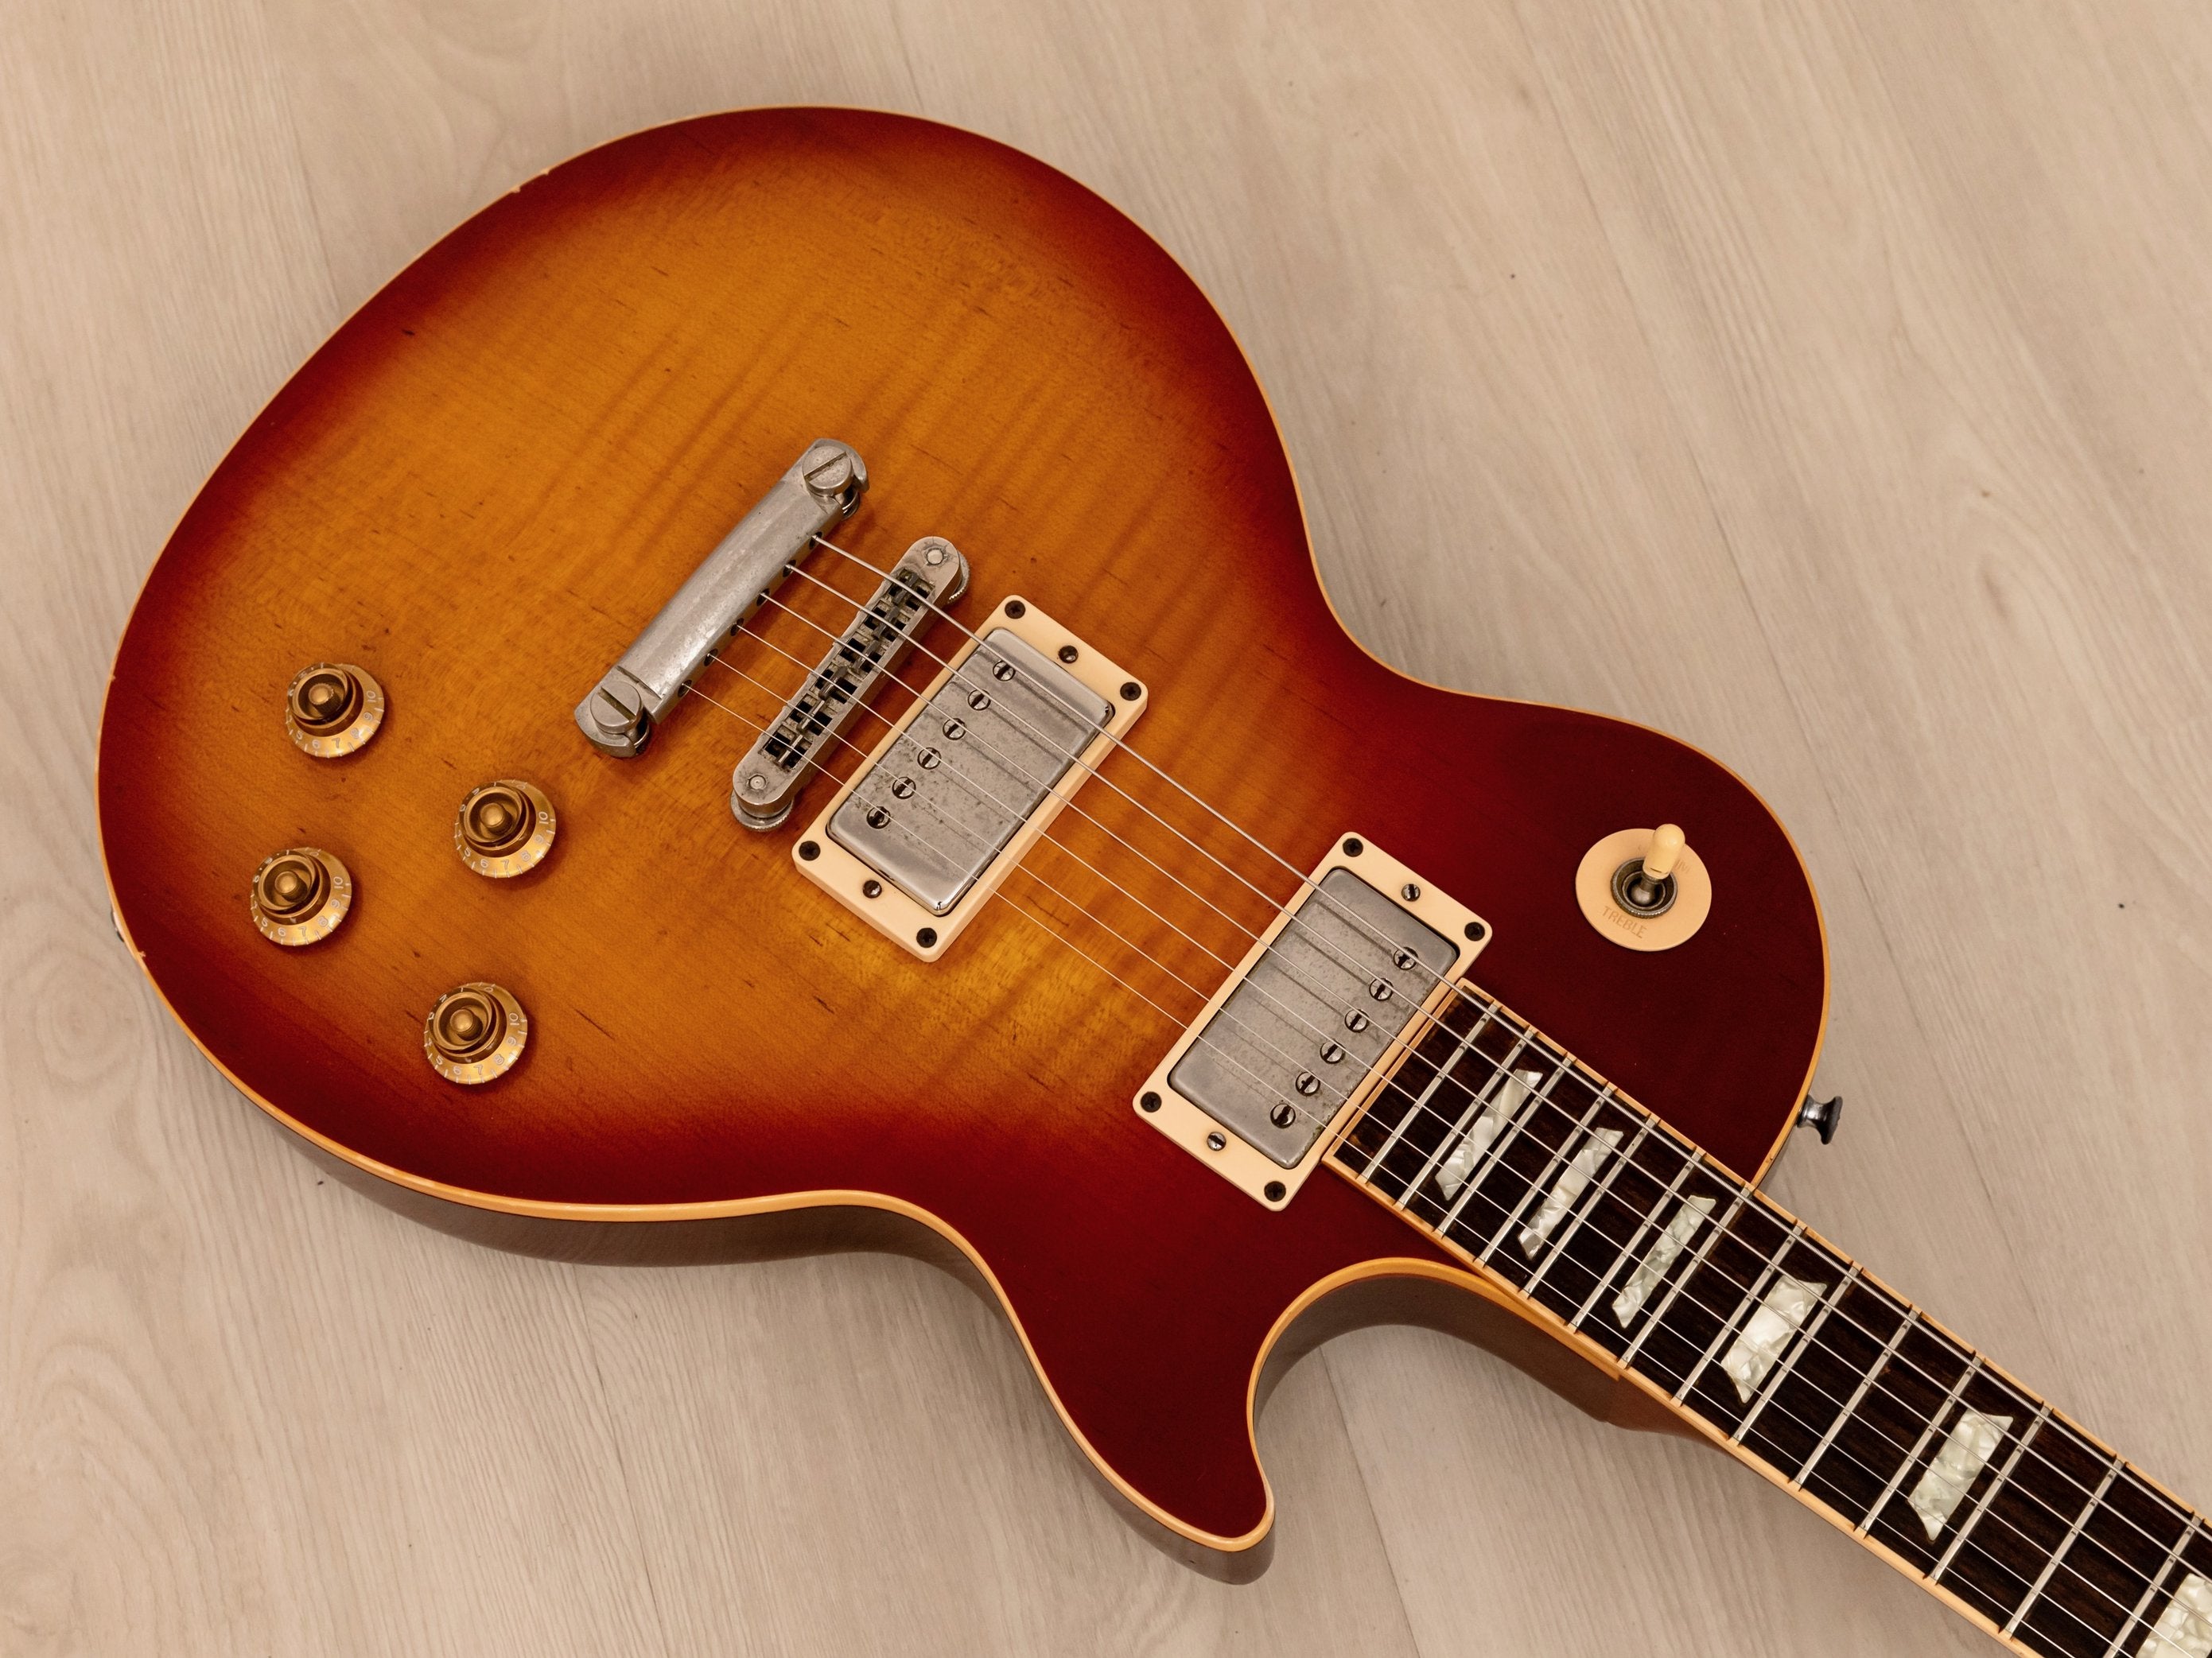 2002 Gibson Les Paul Standard Plus AAA Flame Top Cherry Sunburst w/ 57 Classic PAFs, Case